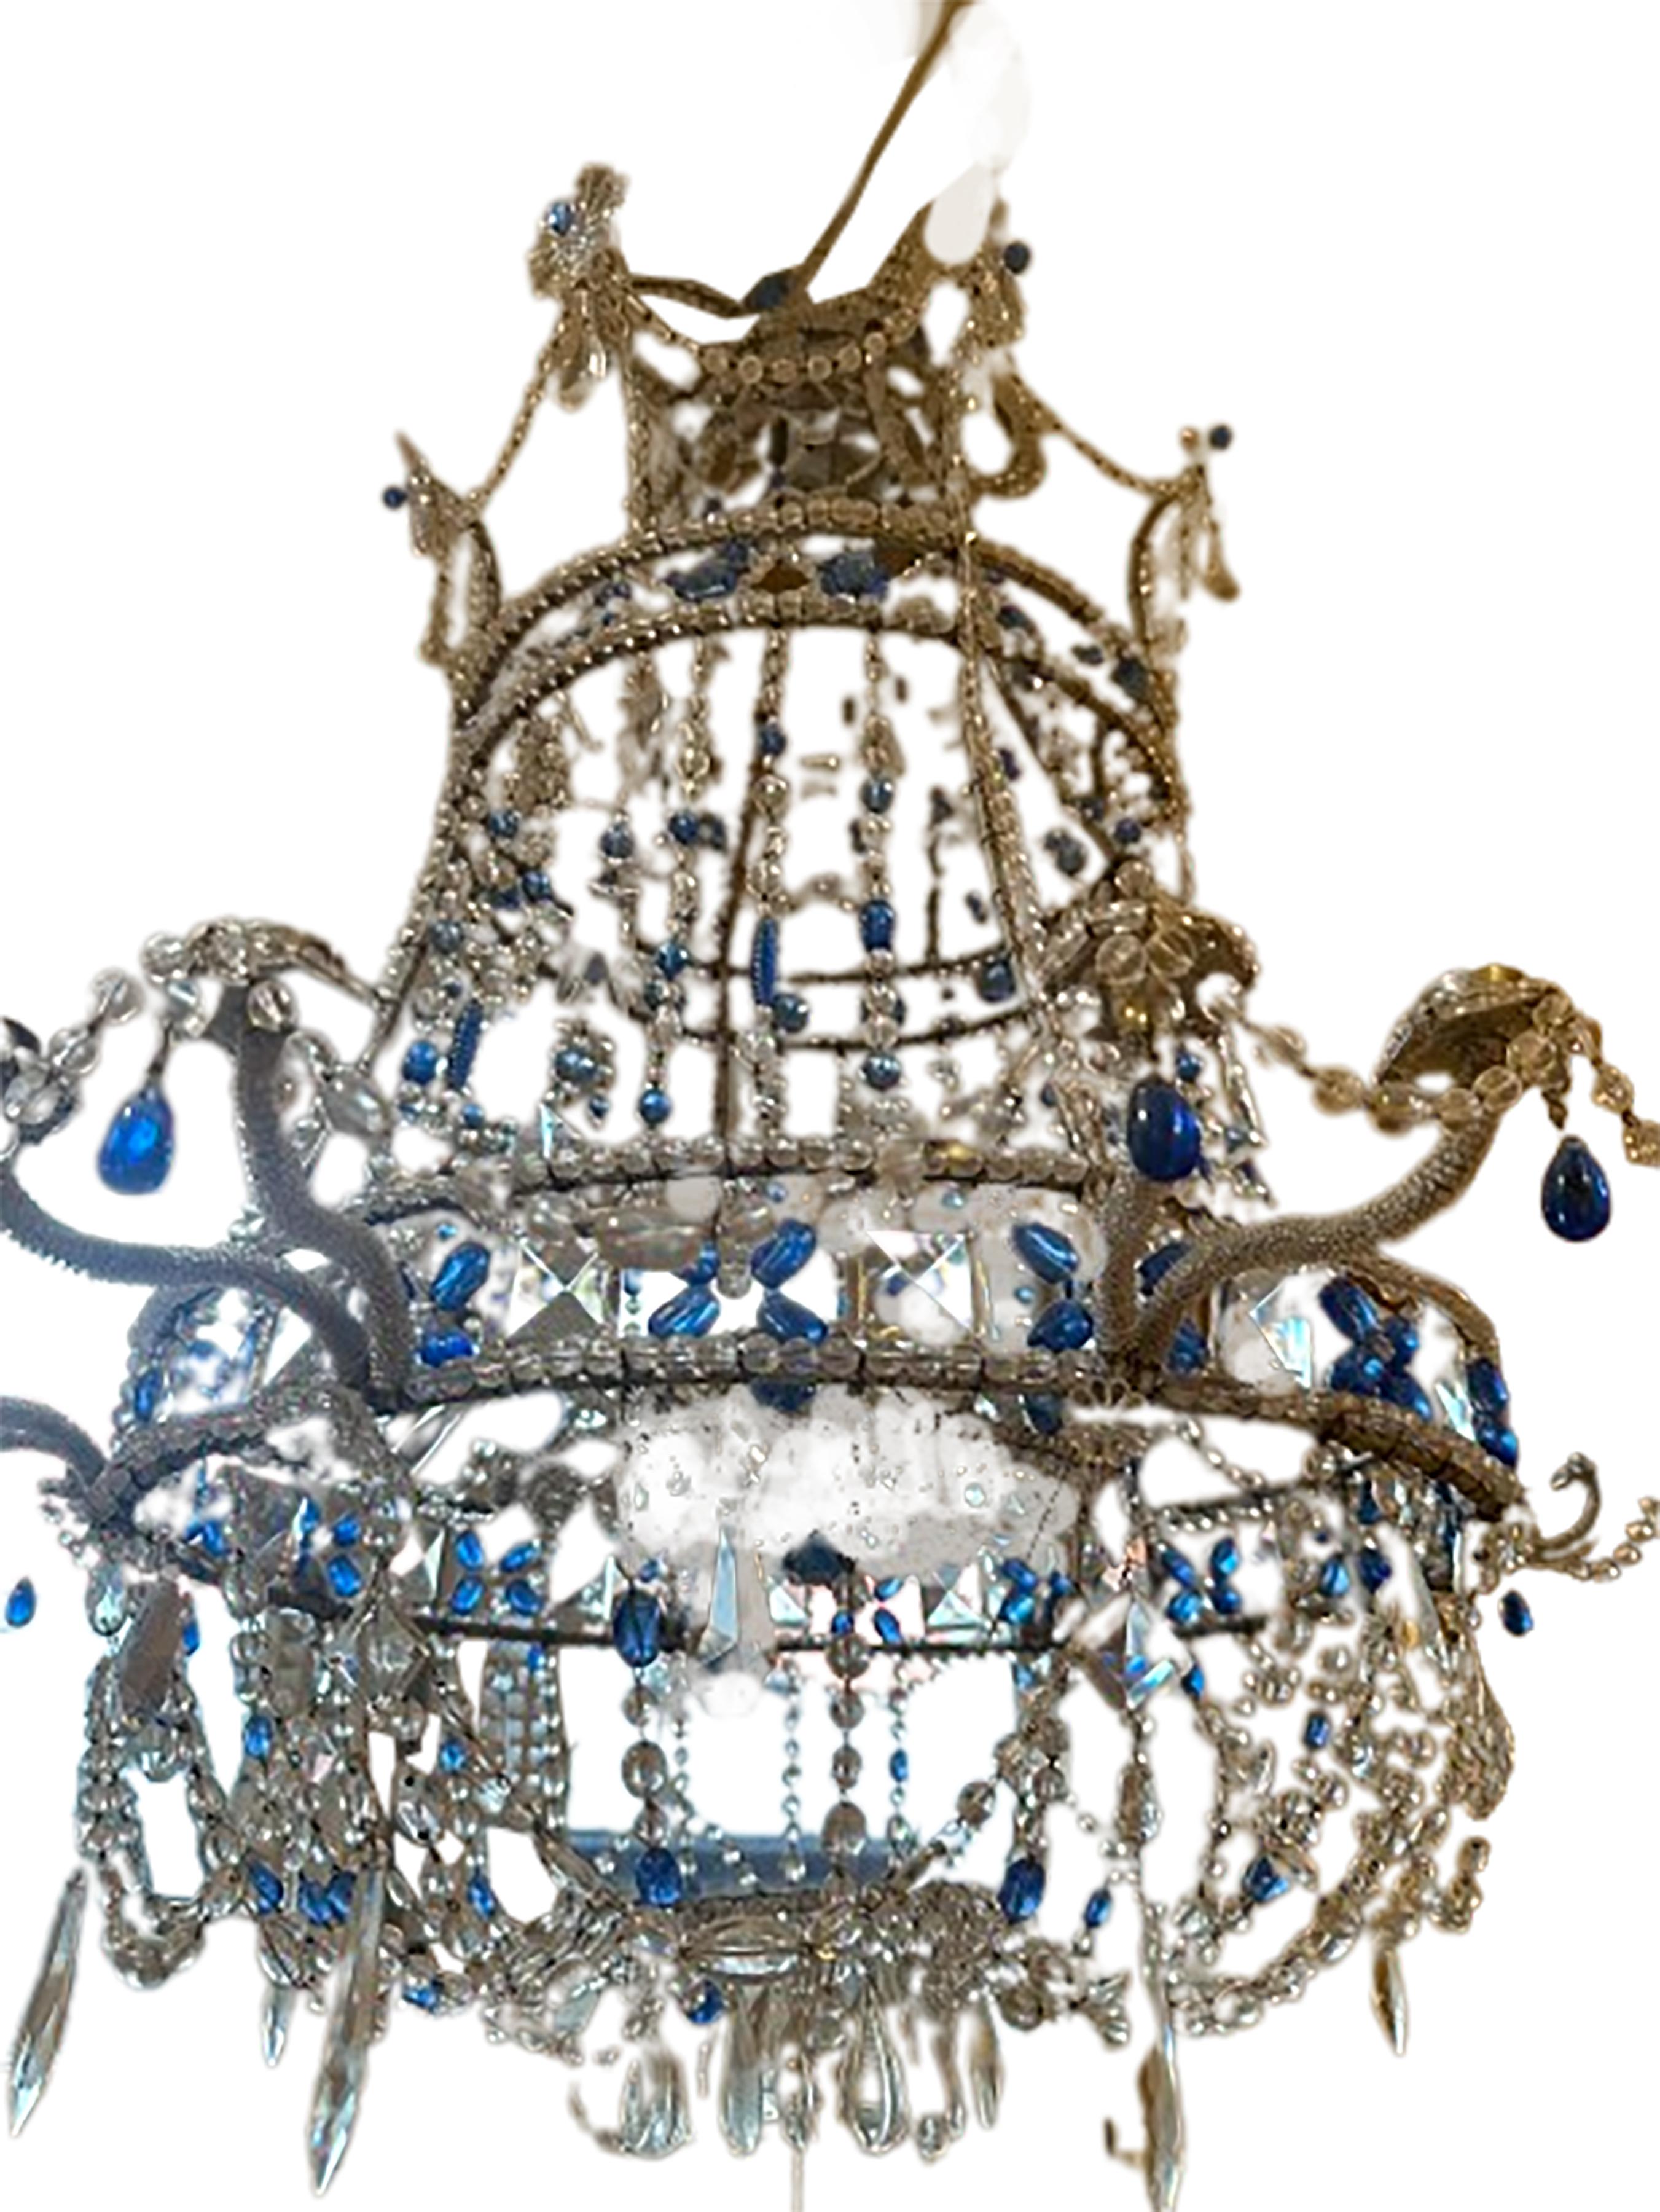 A blue and clear crystal chandelier in the Russian Imperial style. Created in the early 20th Century. Three levels of brilliantly strung crystal patterns cascade down from the top. An expertly structured frame canopy encircles the top, mid, and